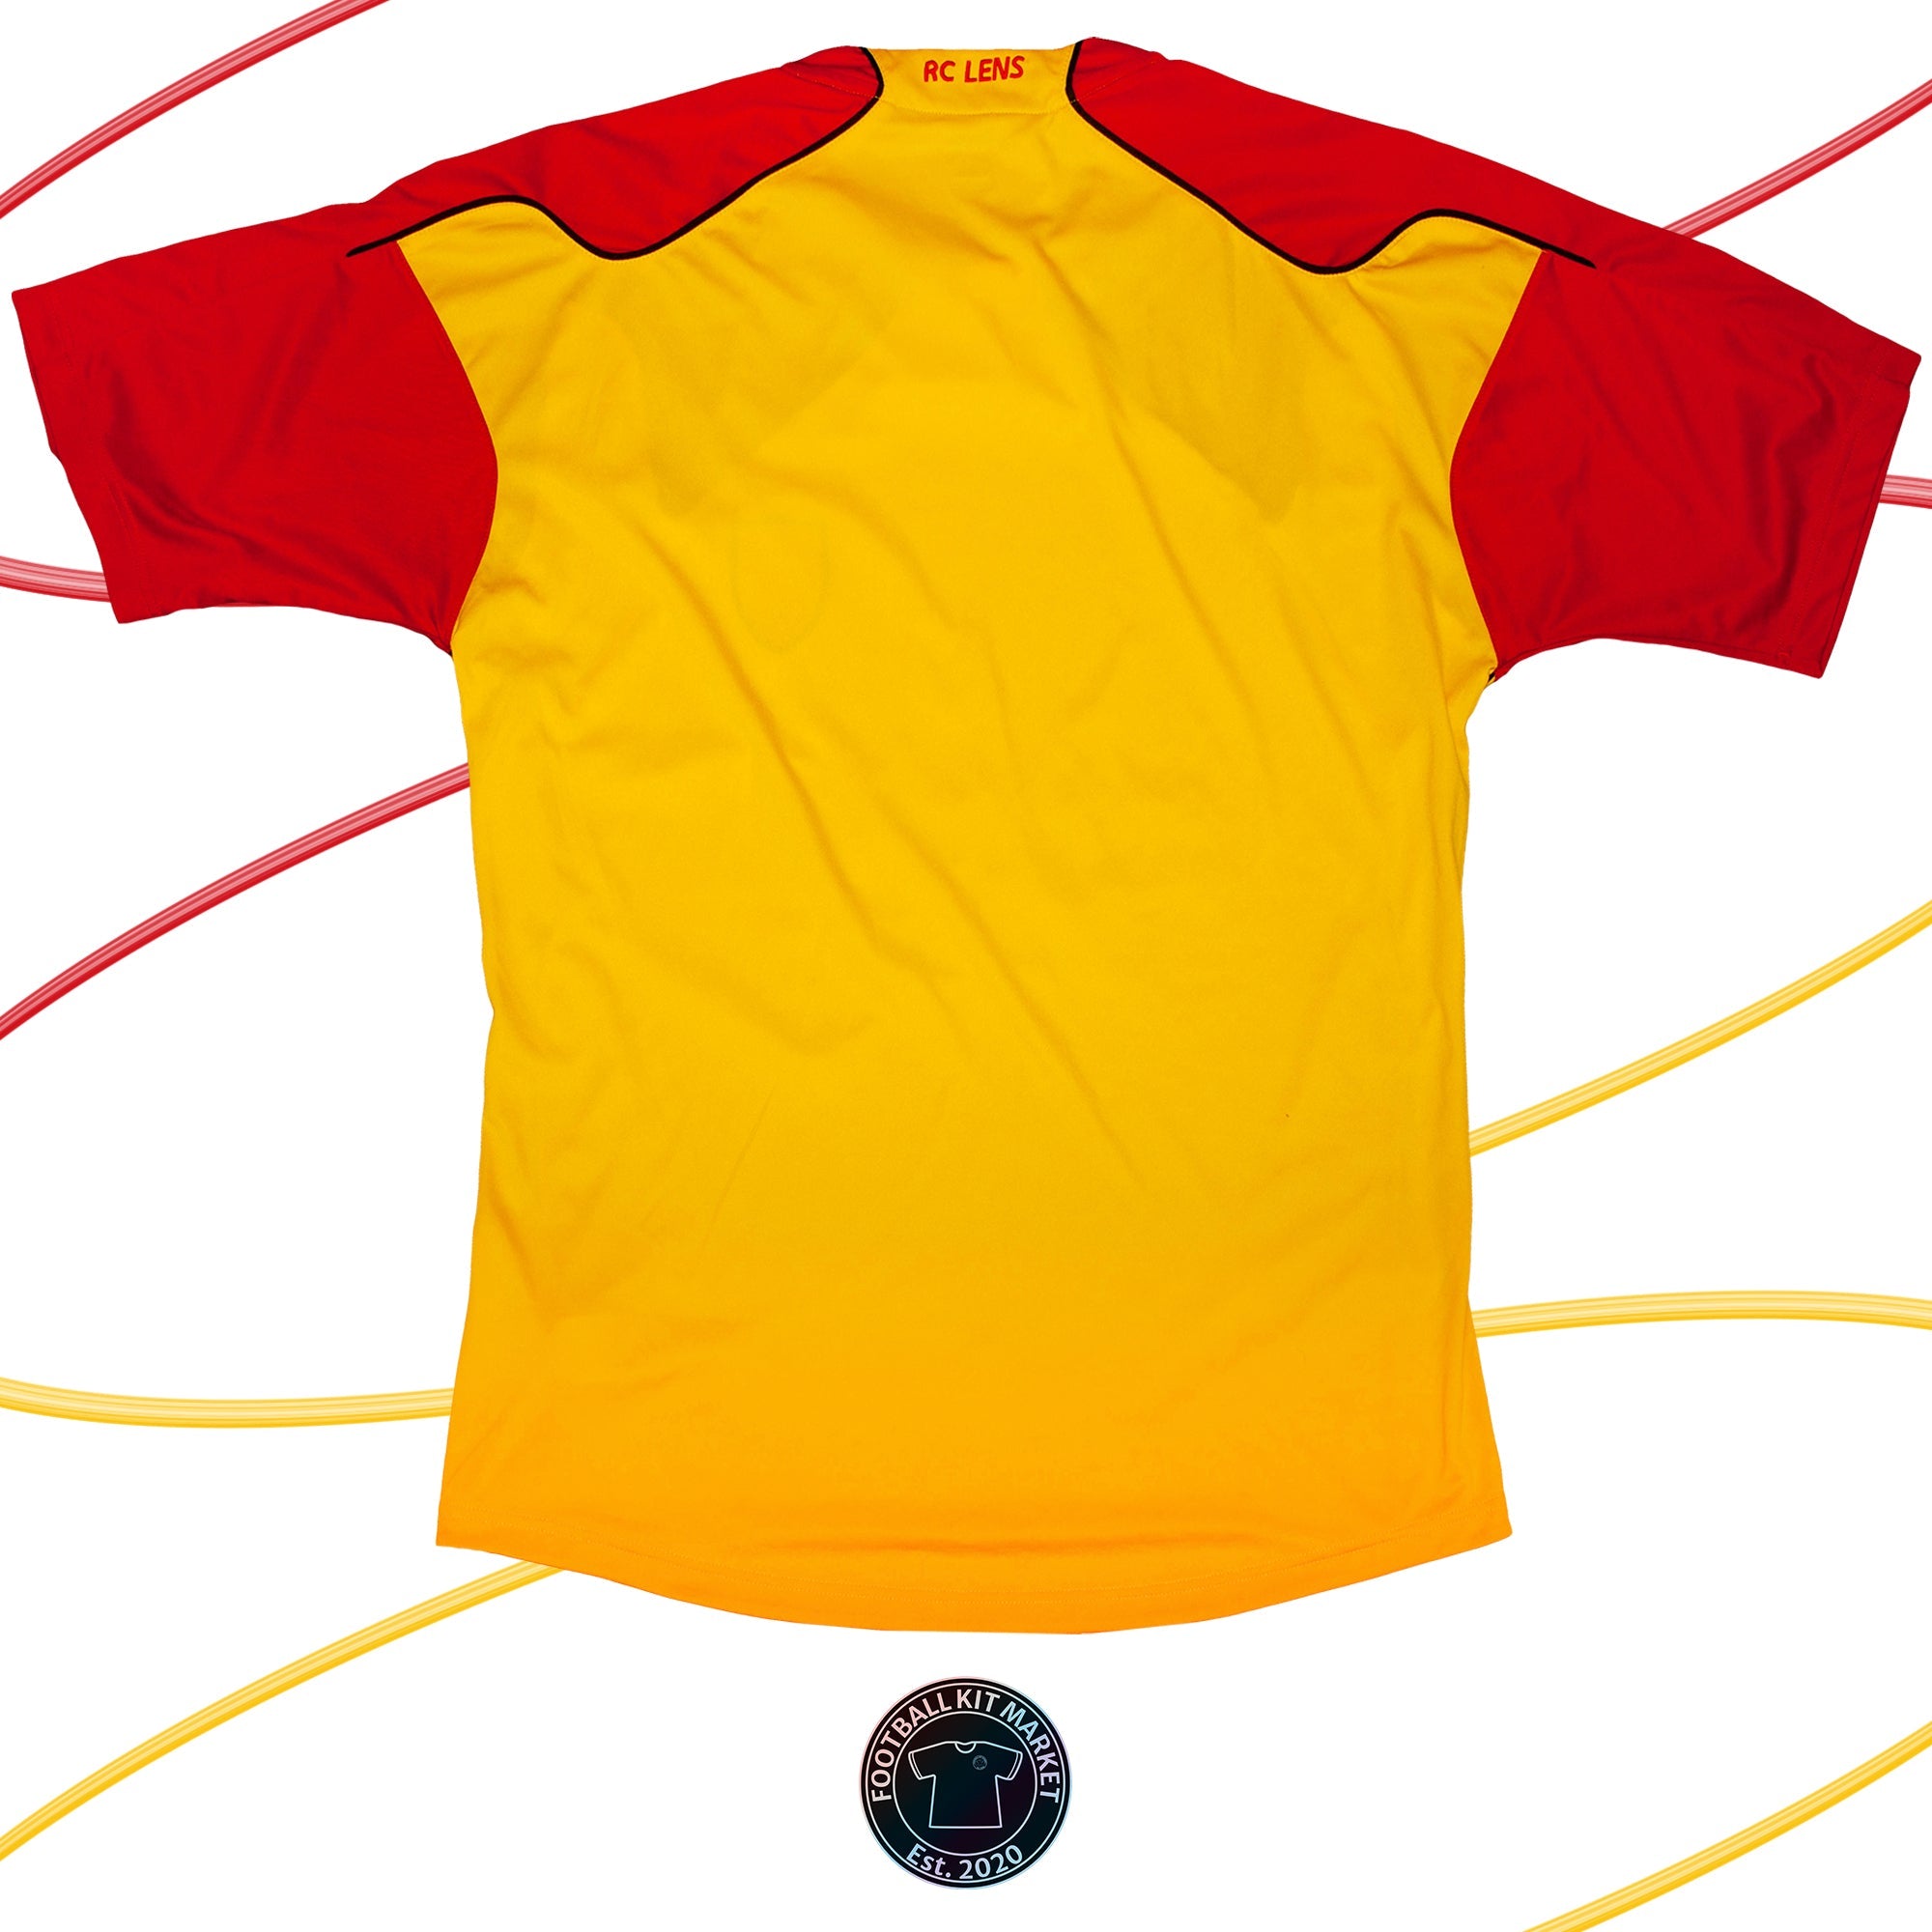 Genuine RC LENS Home (2010-2011) - REEBOK (XL) - Product Image from Football Kit Market